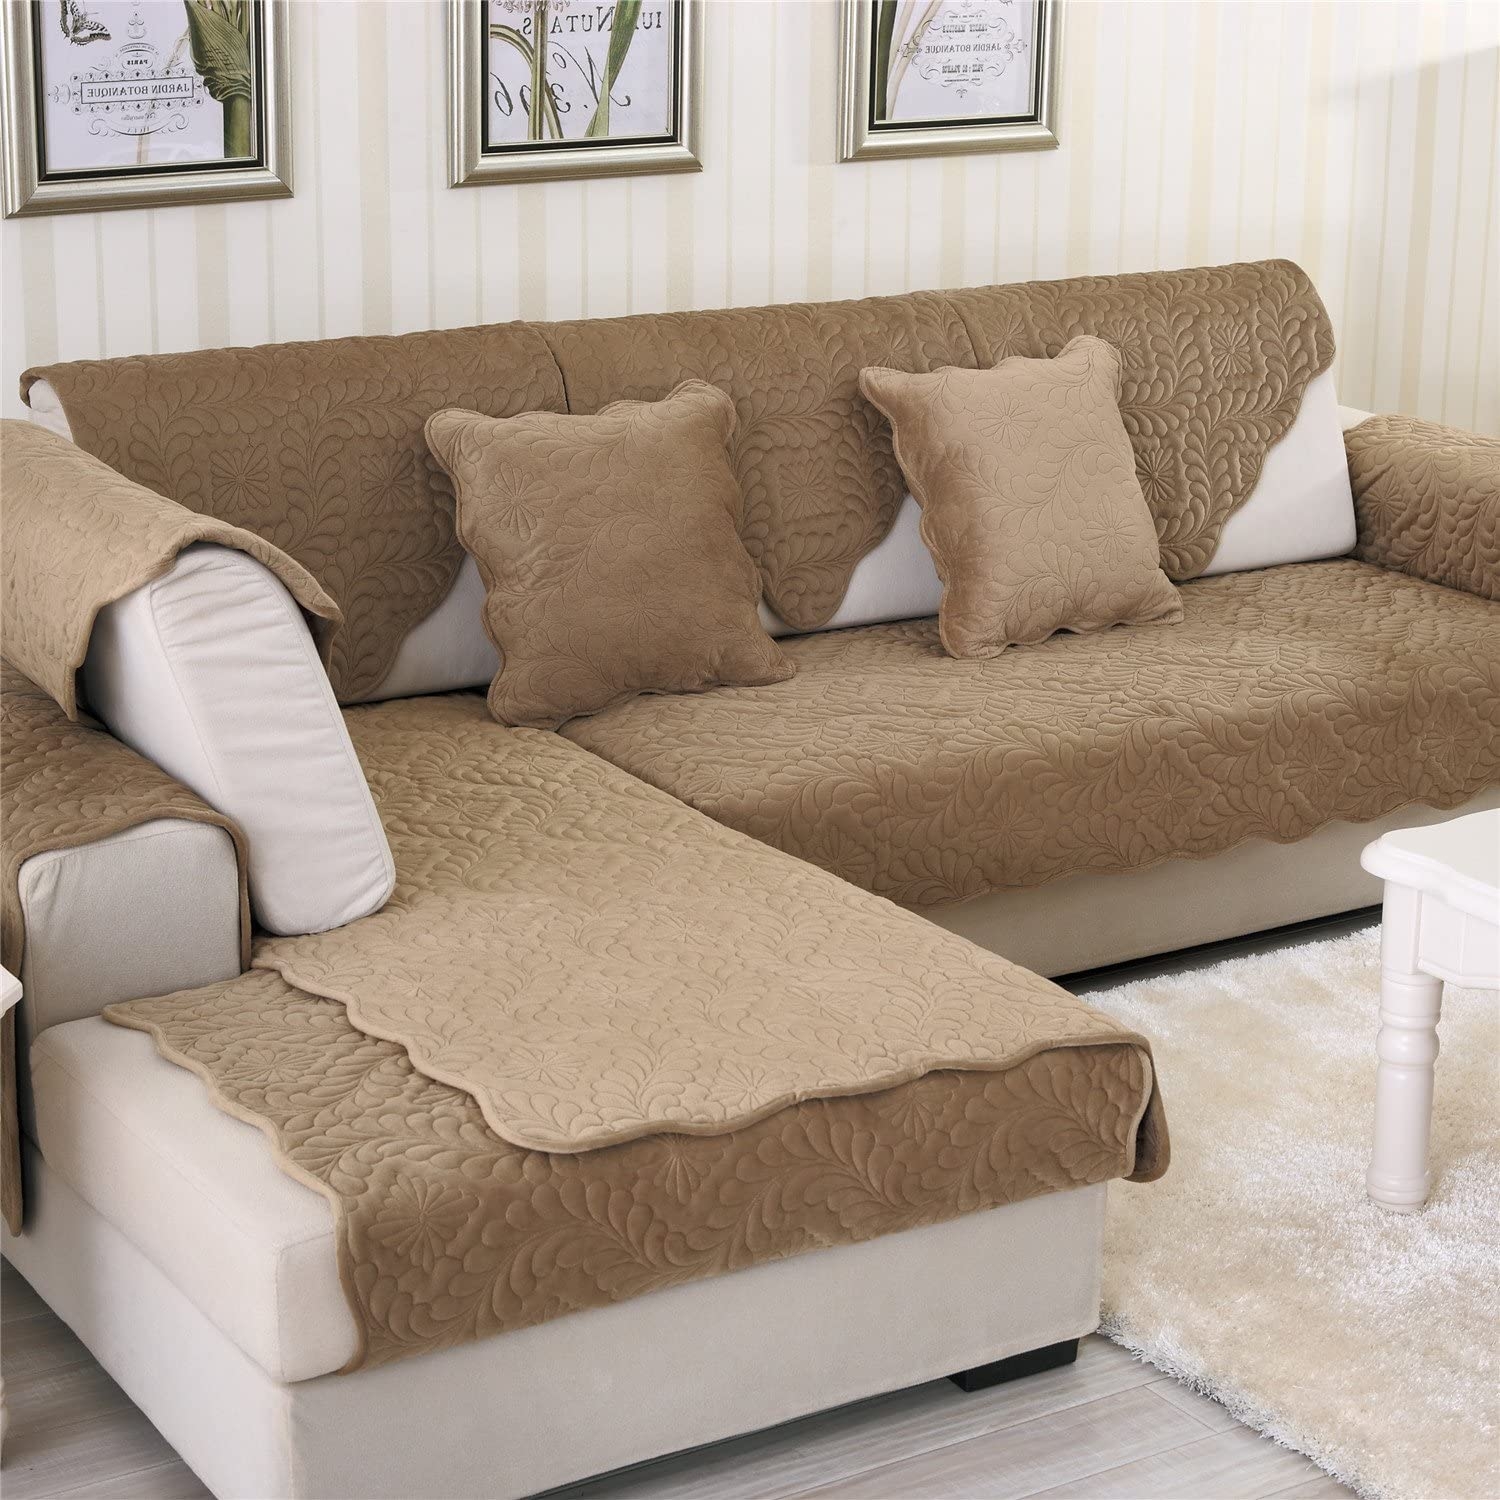 Details about   Non-slip Stretch Slipcover Sectional Couch Covers L Shape Corner Armchair Covers 